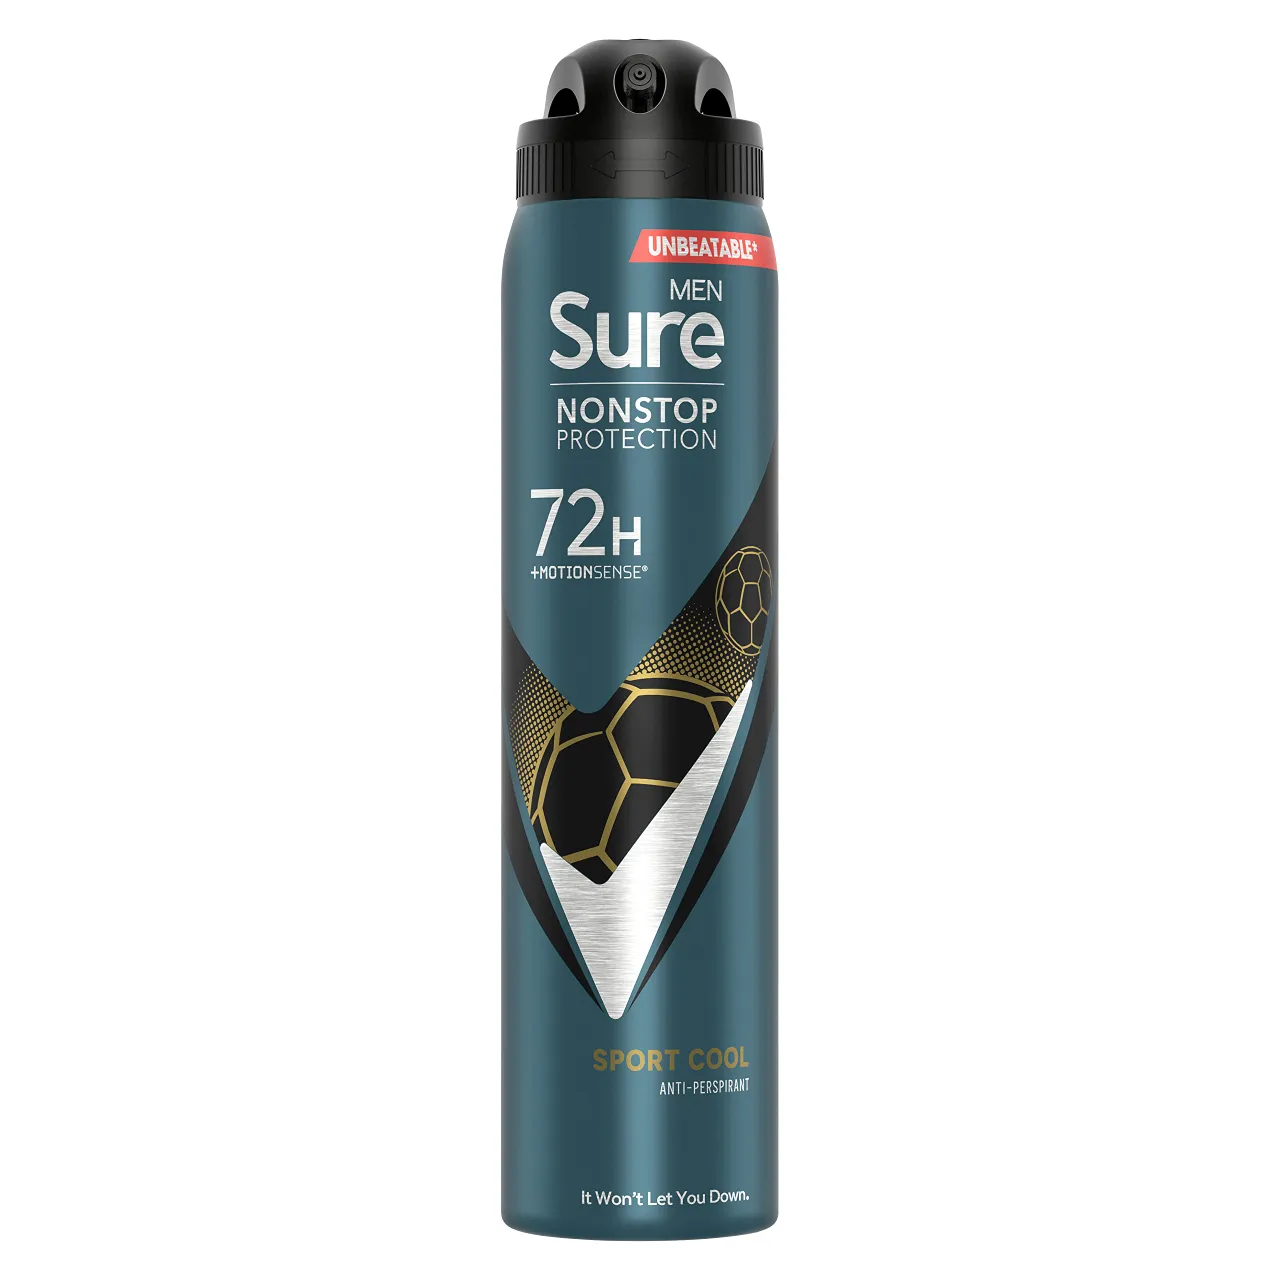 Sure Sport Cool Anti-perspirant 72h Protection